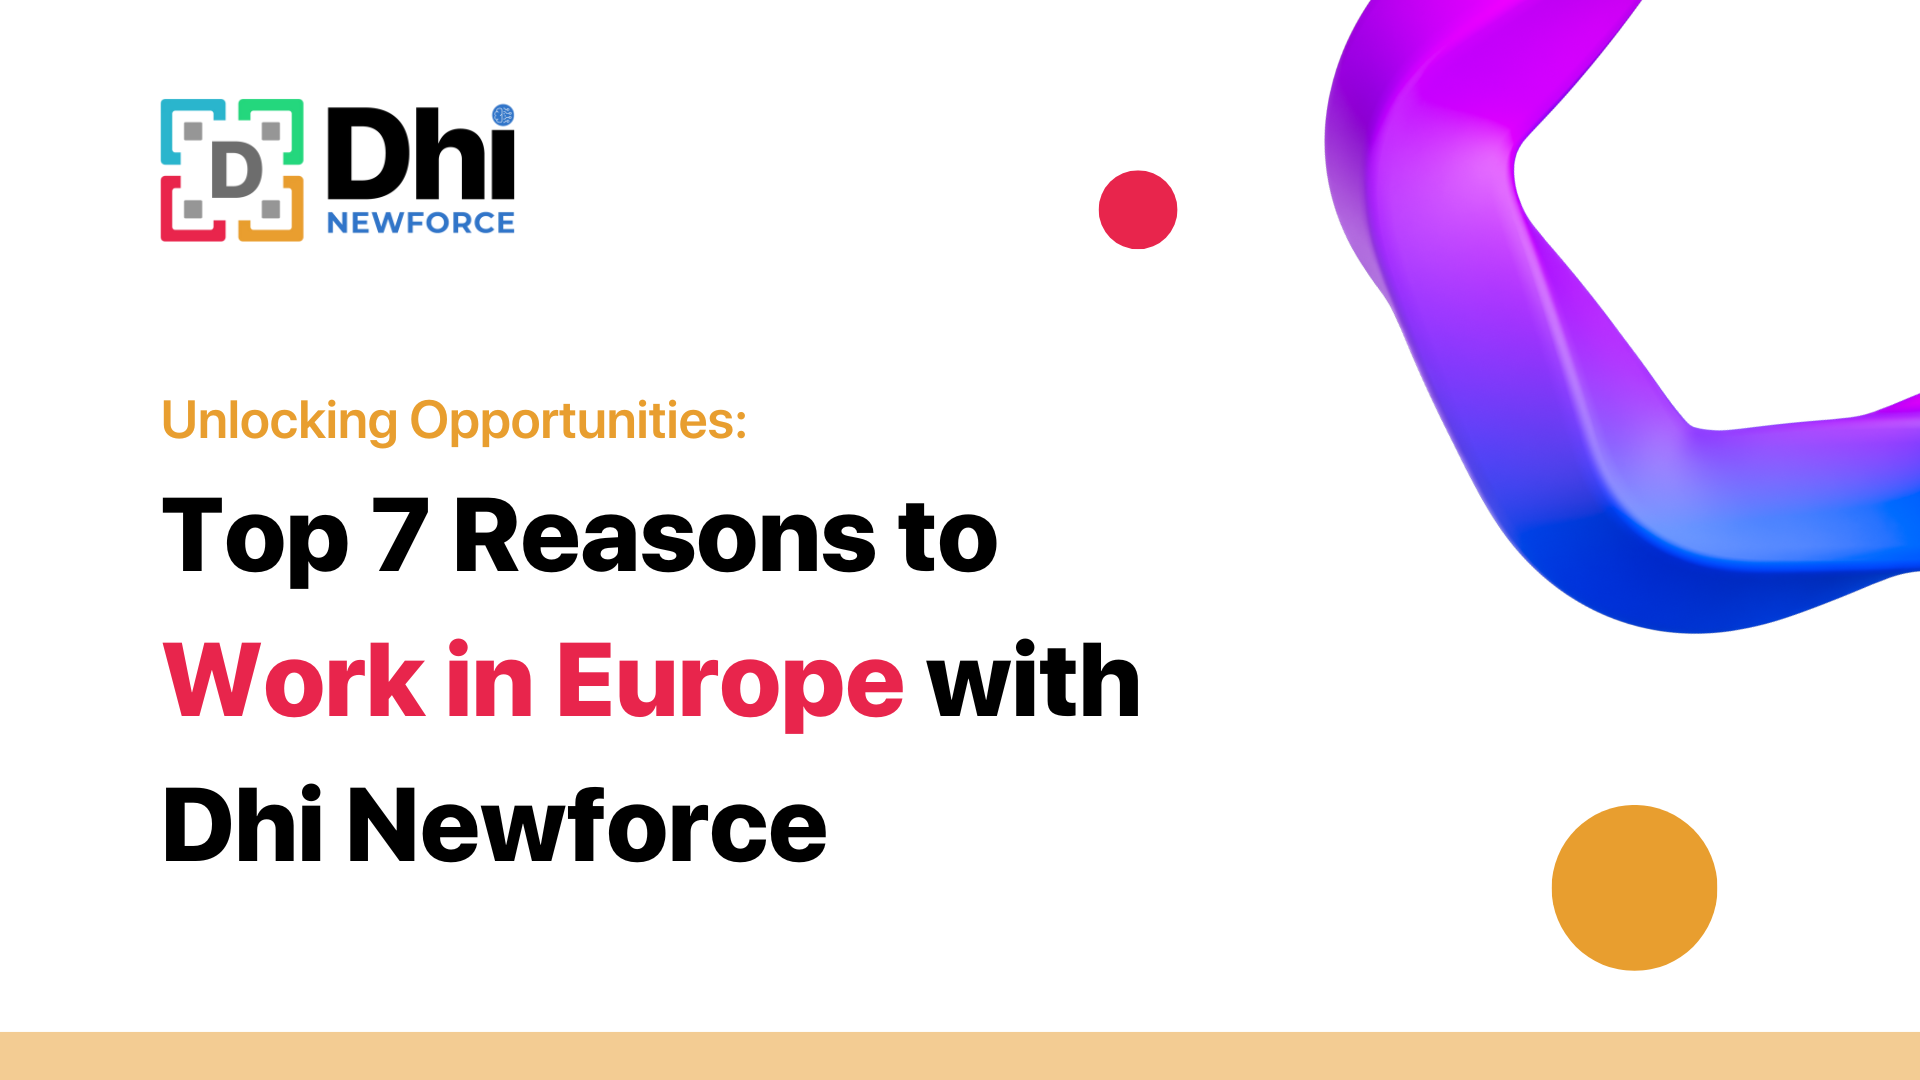 Top 7 Reasons to Work in Europe with Dhi Newforce